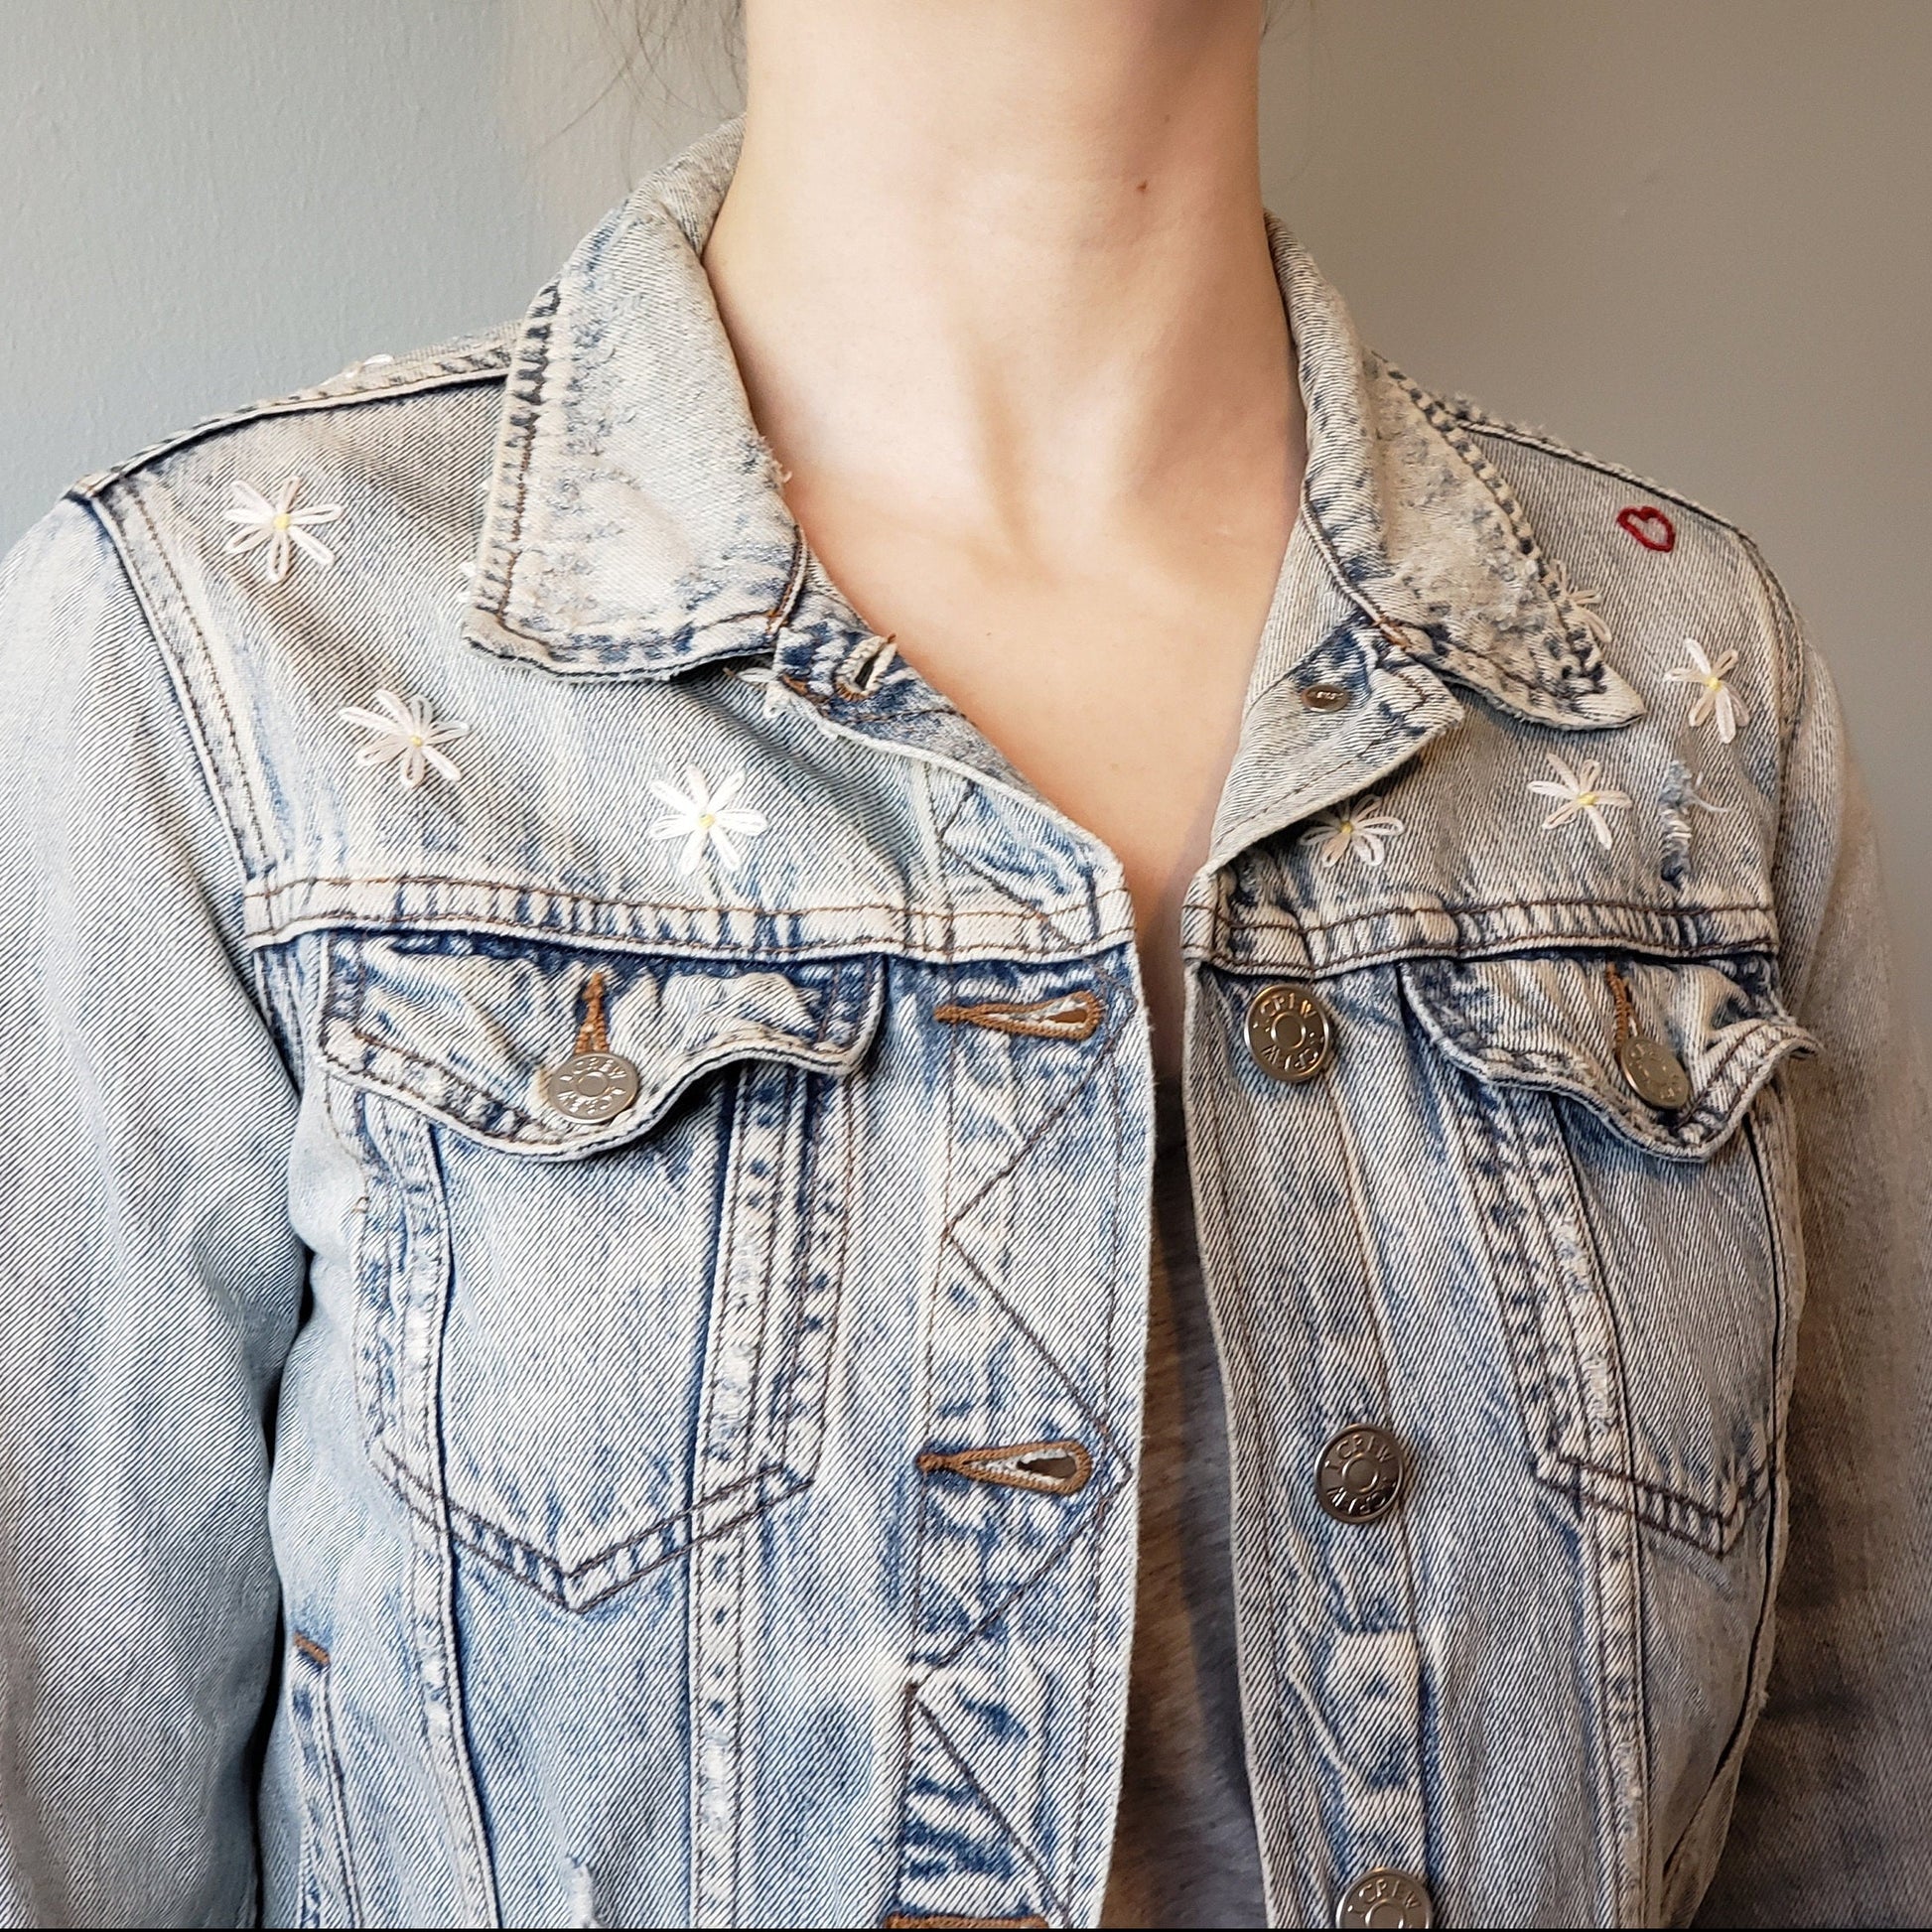 We see the jacket from the right now. The daisies are hand embroidered in an arc on the right chest section. The jacket is a button up acid wash jean jacket with buttoned chest pockets and classic detailing.